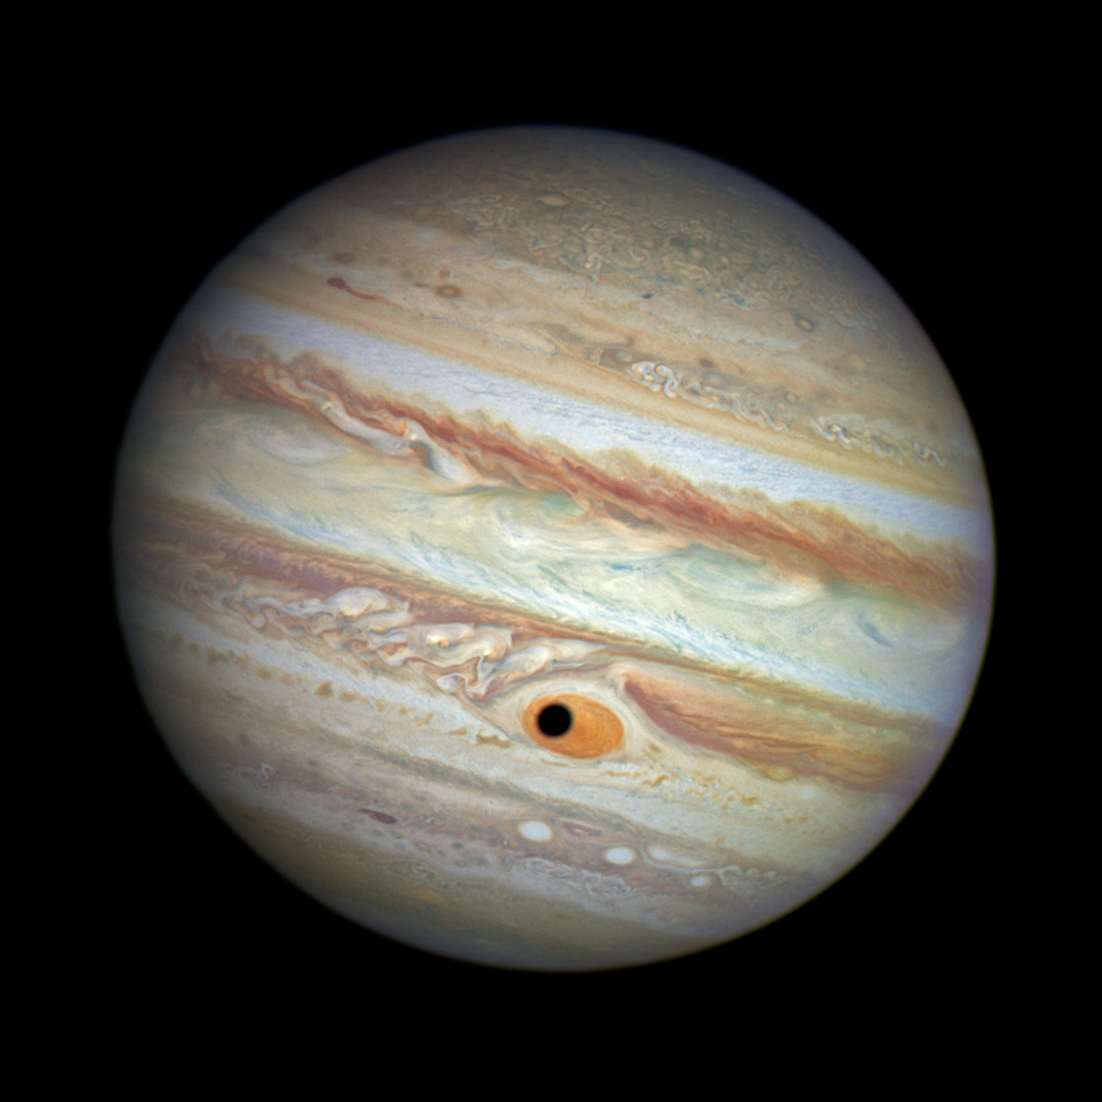 A picture of jupiter that clearly shows the great red spot